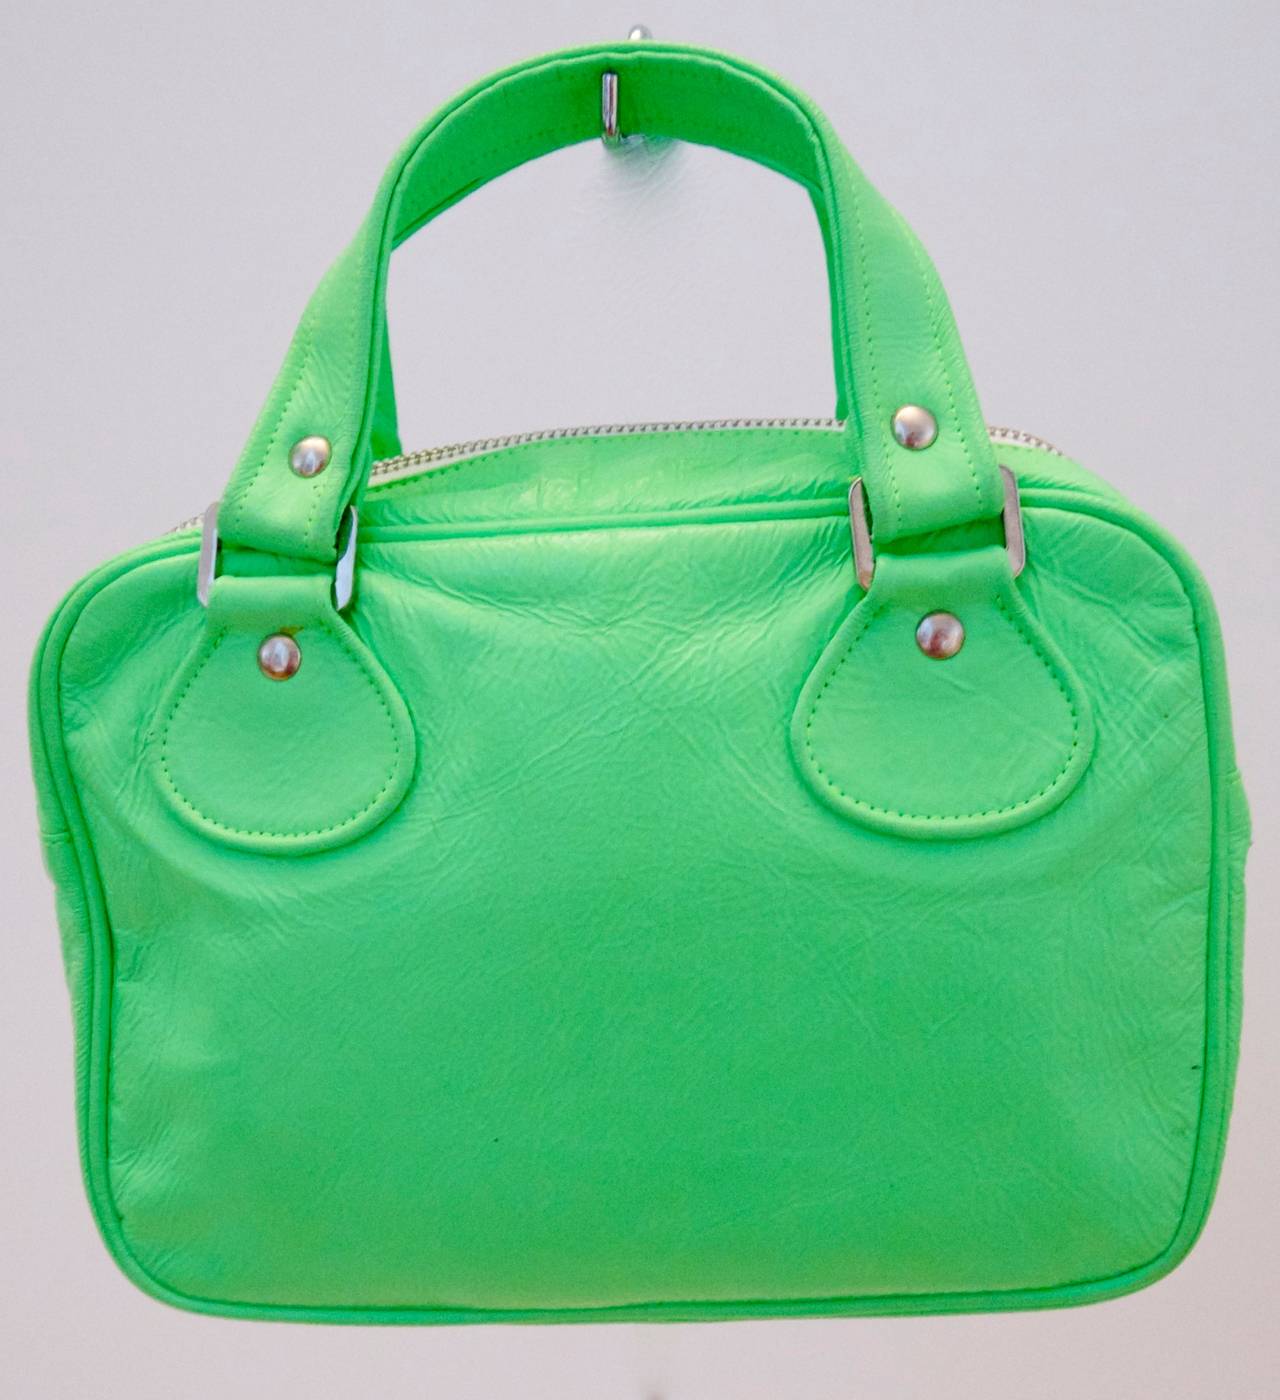 Courreges green small tote bag. The bag has a zip closure at the top and still possesses its original certificate of authenticity. It's in remarkable condition considering its age. The plastic material on the exterior of the bag is in clean fresh